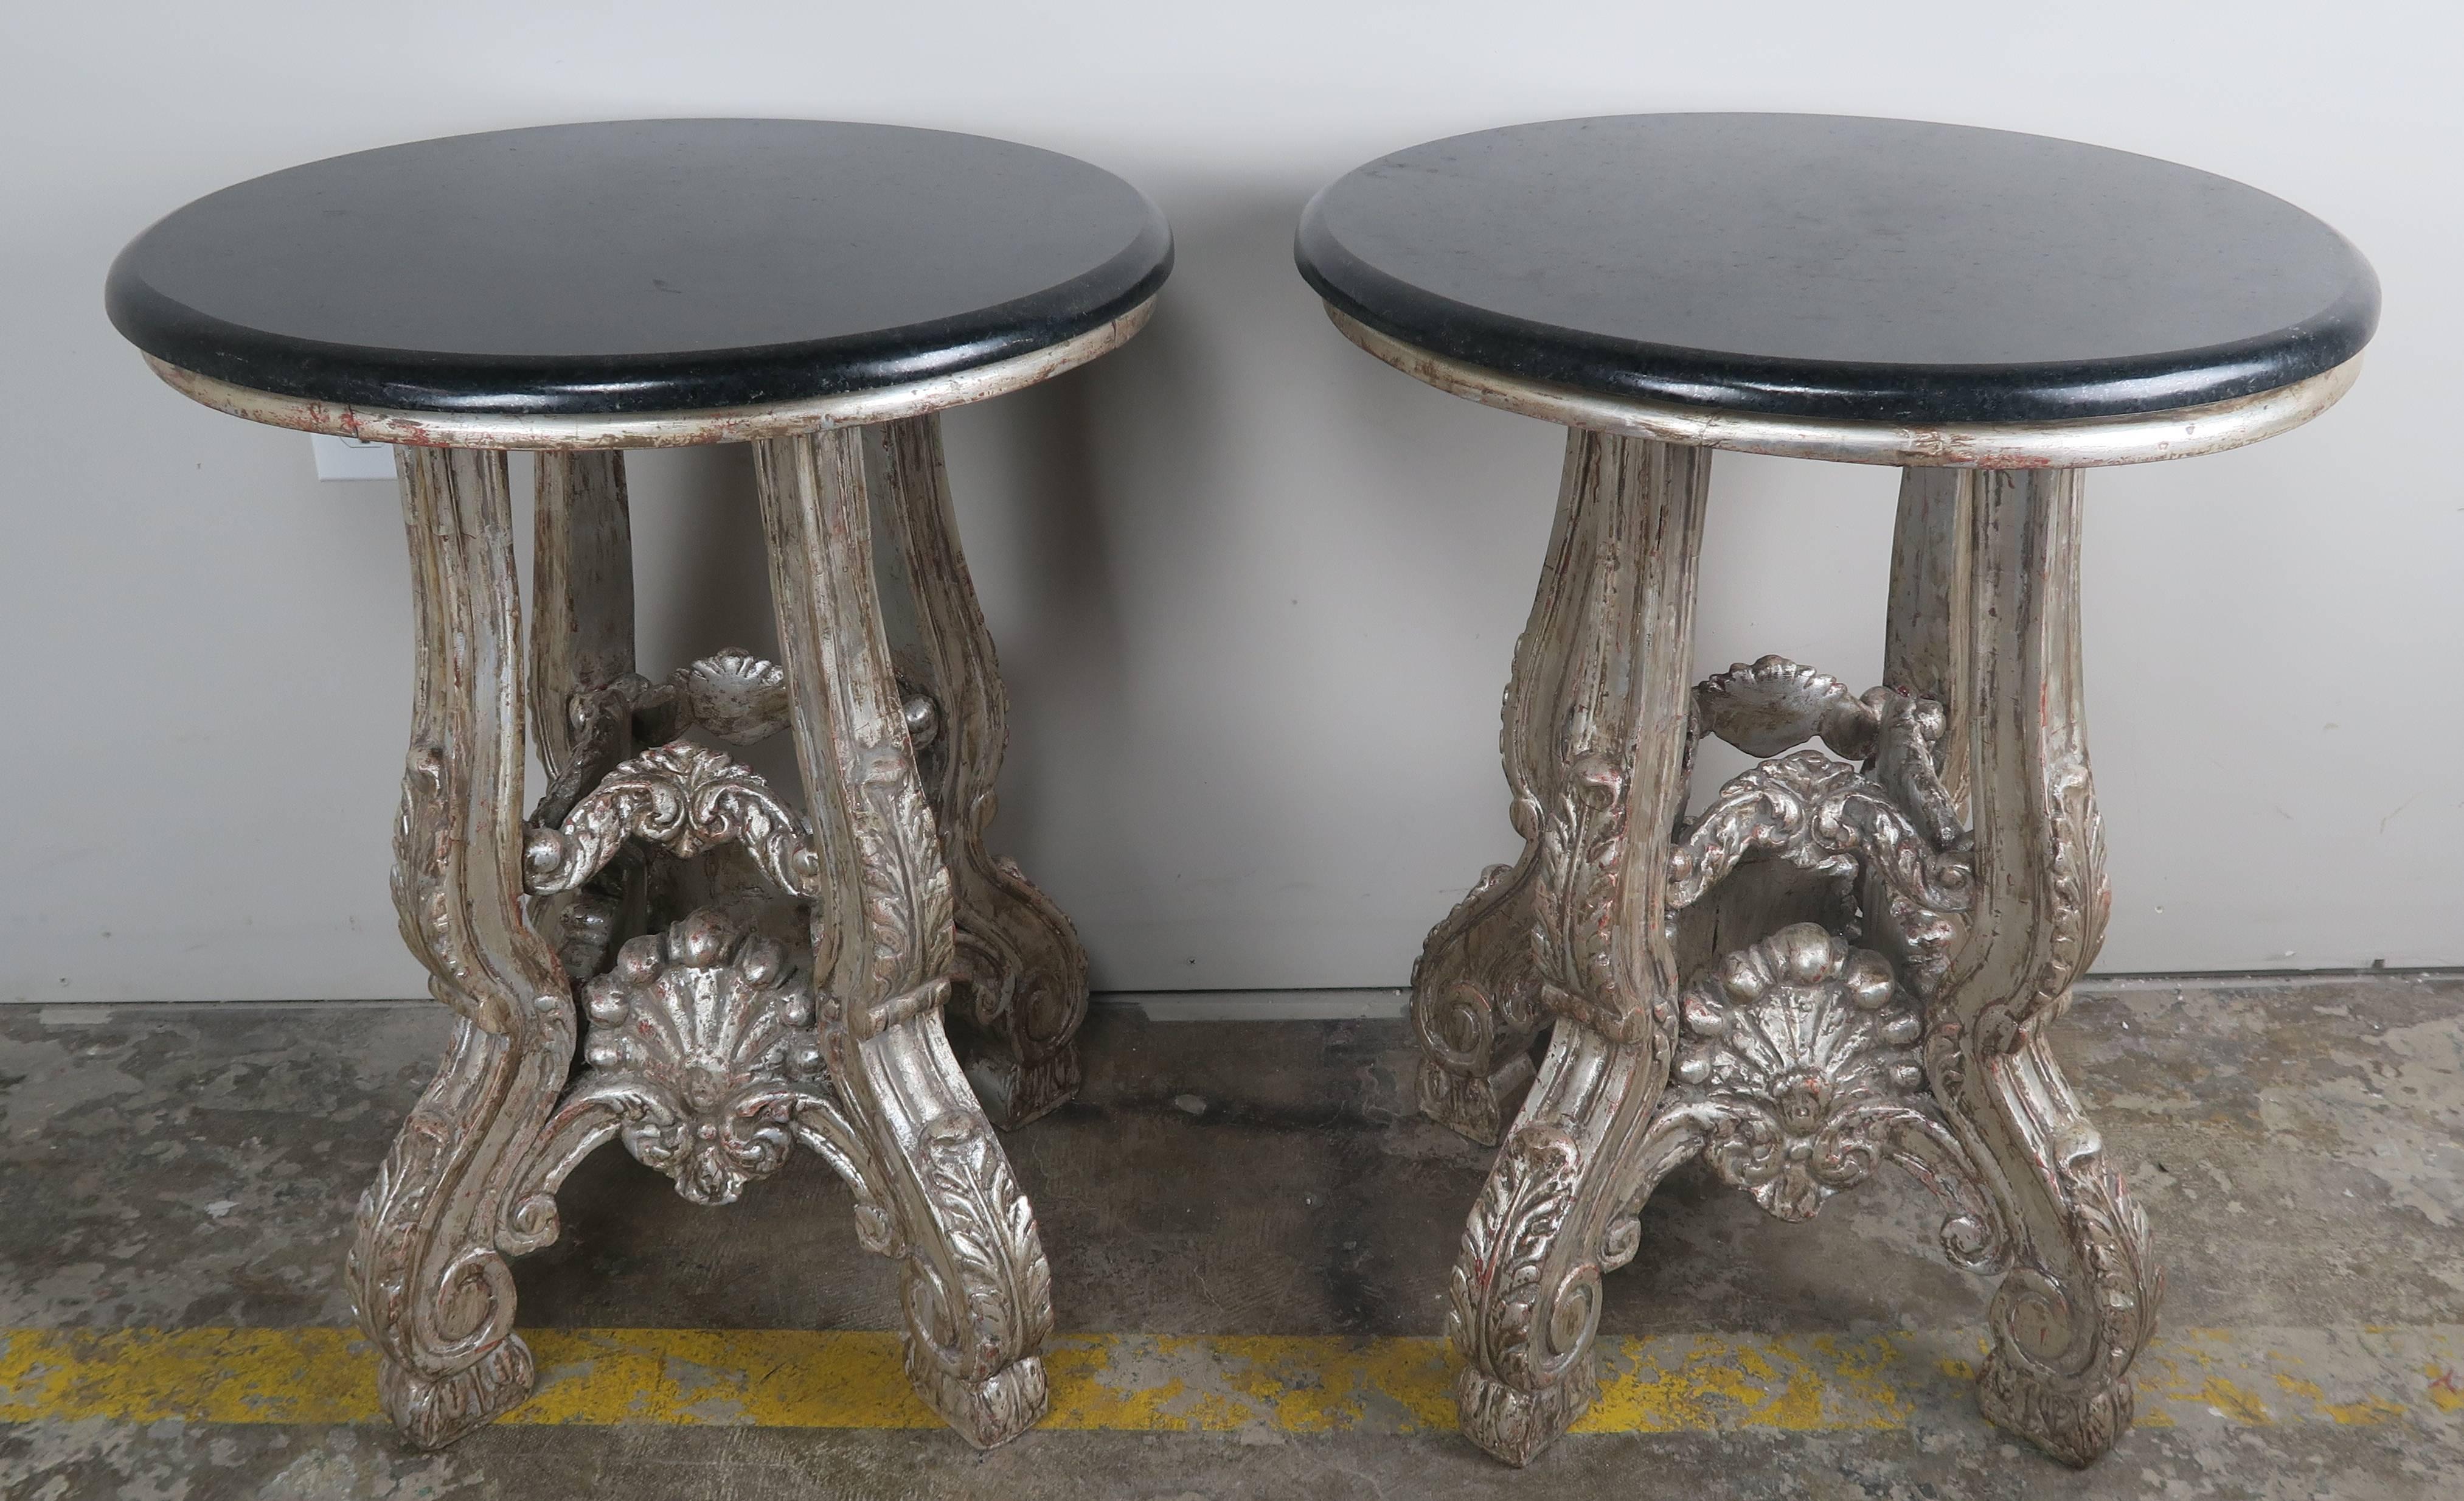 Pair of 1930s French silver leaf carved wood tables standing on four legs with acanthus leaf and scrolled details. Carved shells on all four sides. Back granite tops.